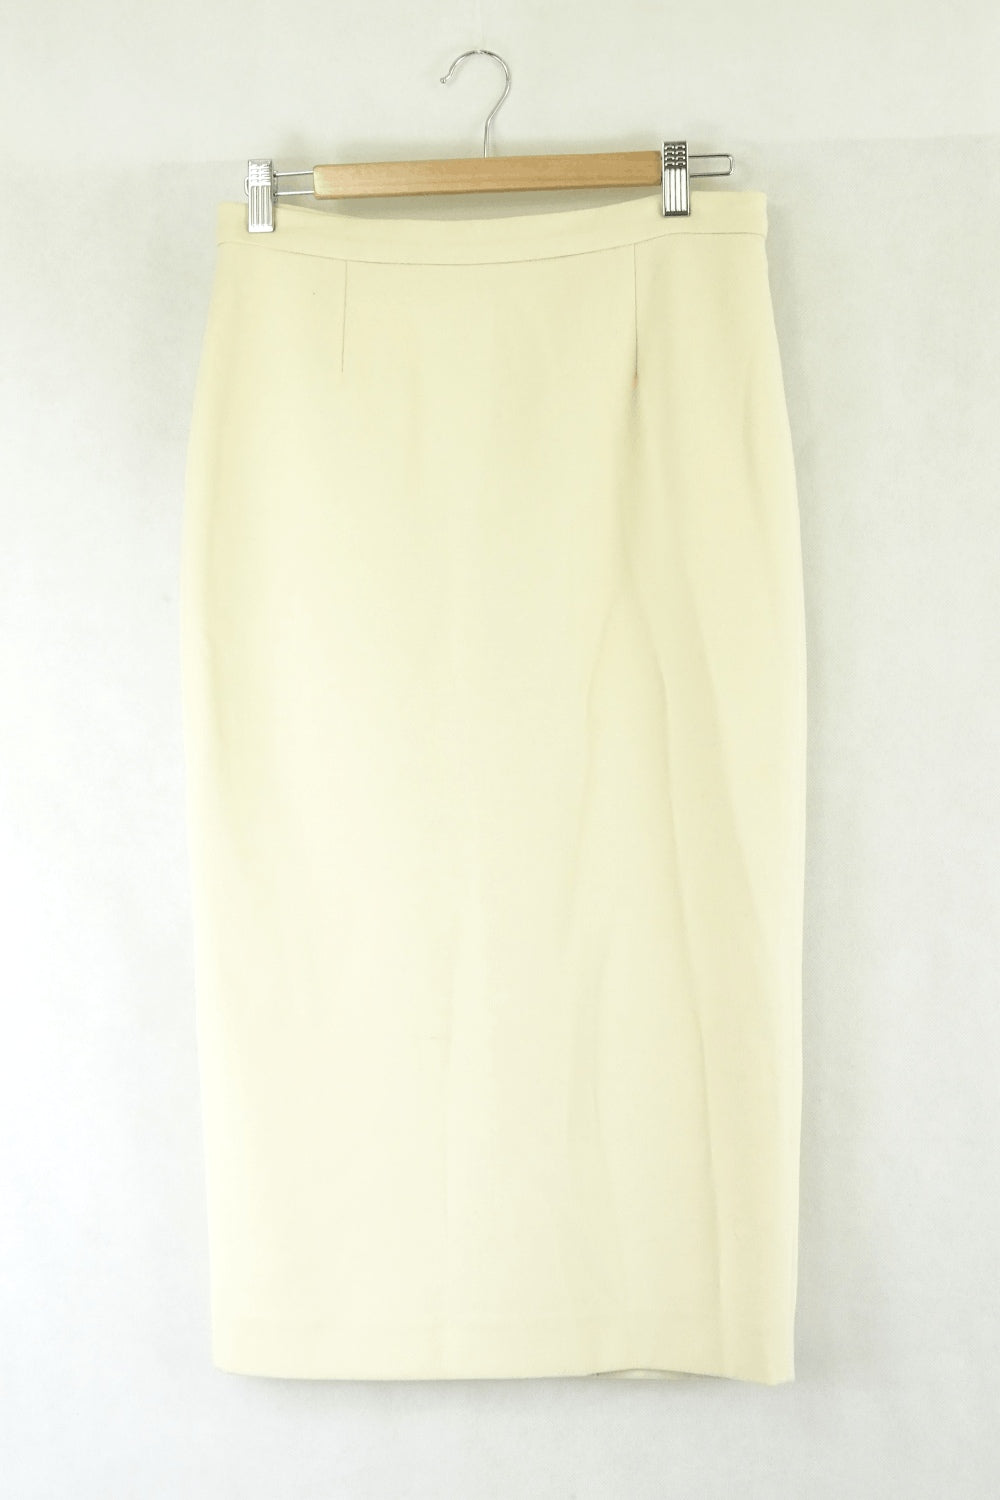 By Timo Yellow Skirt M